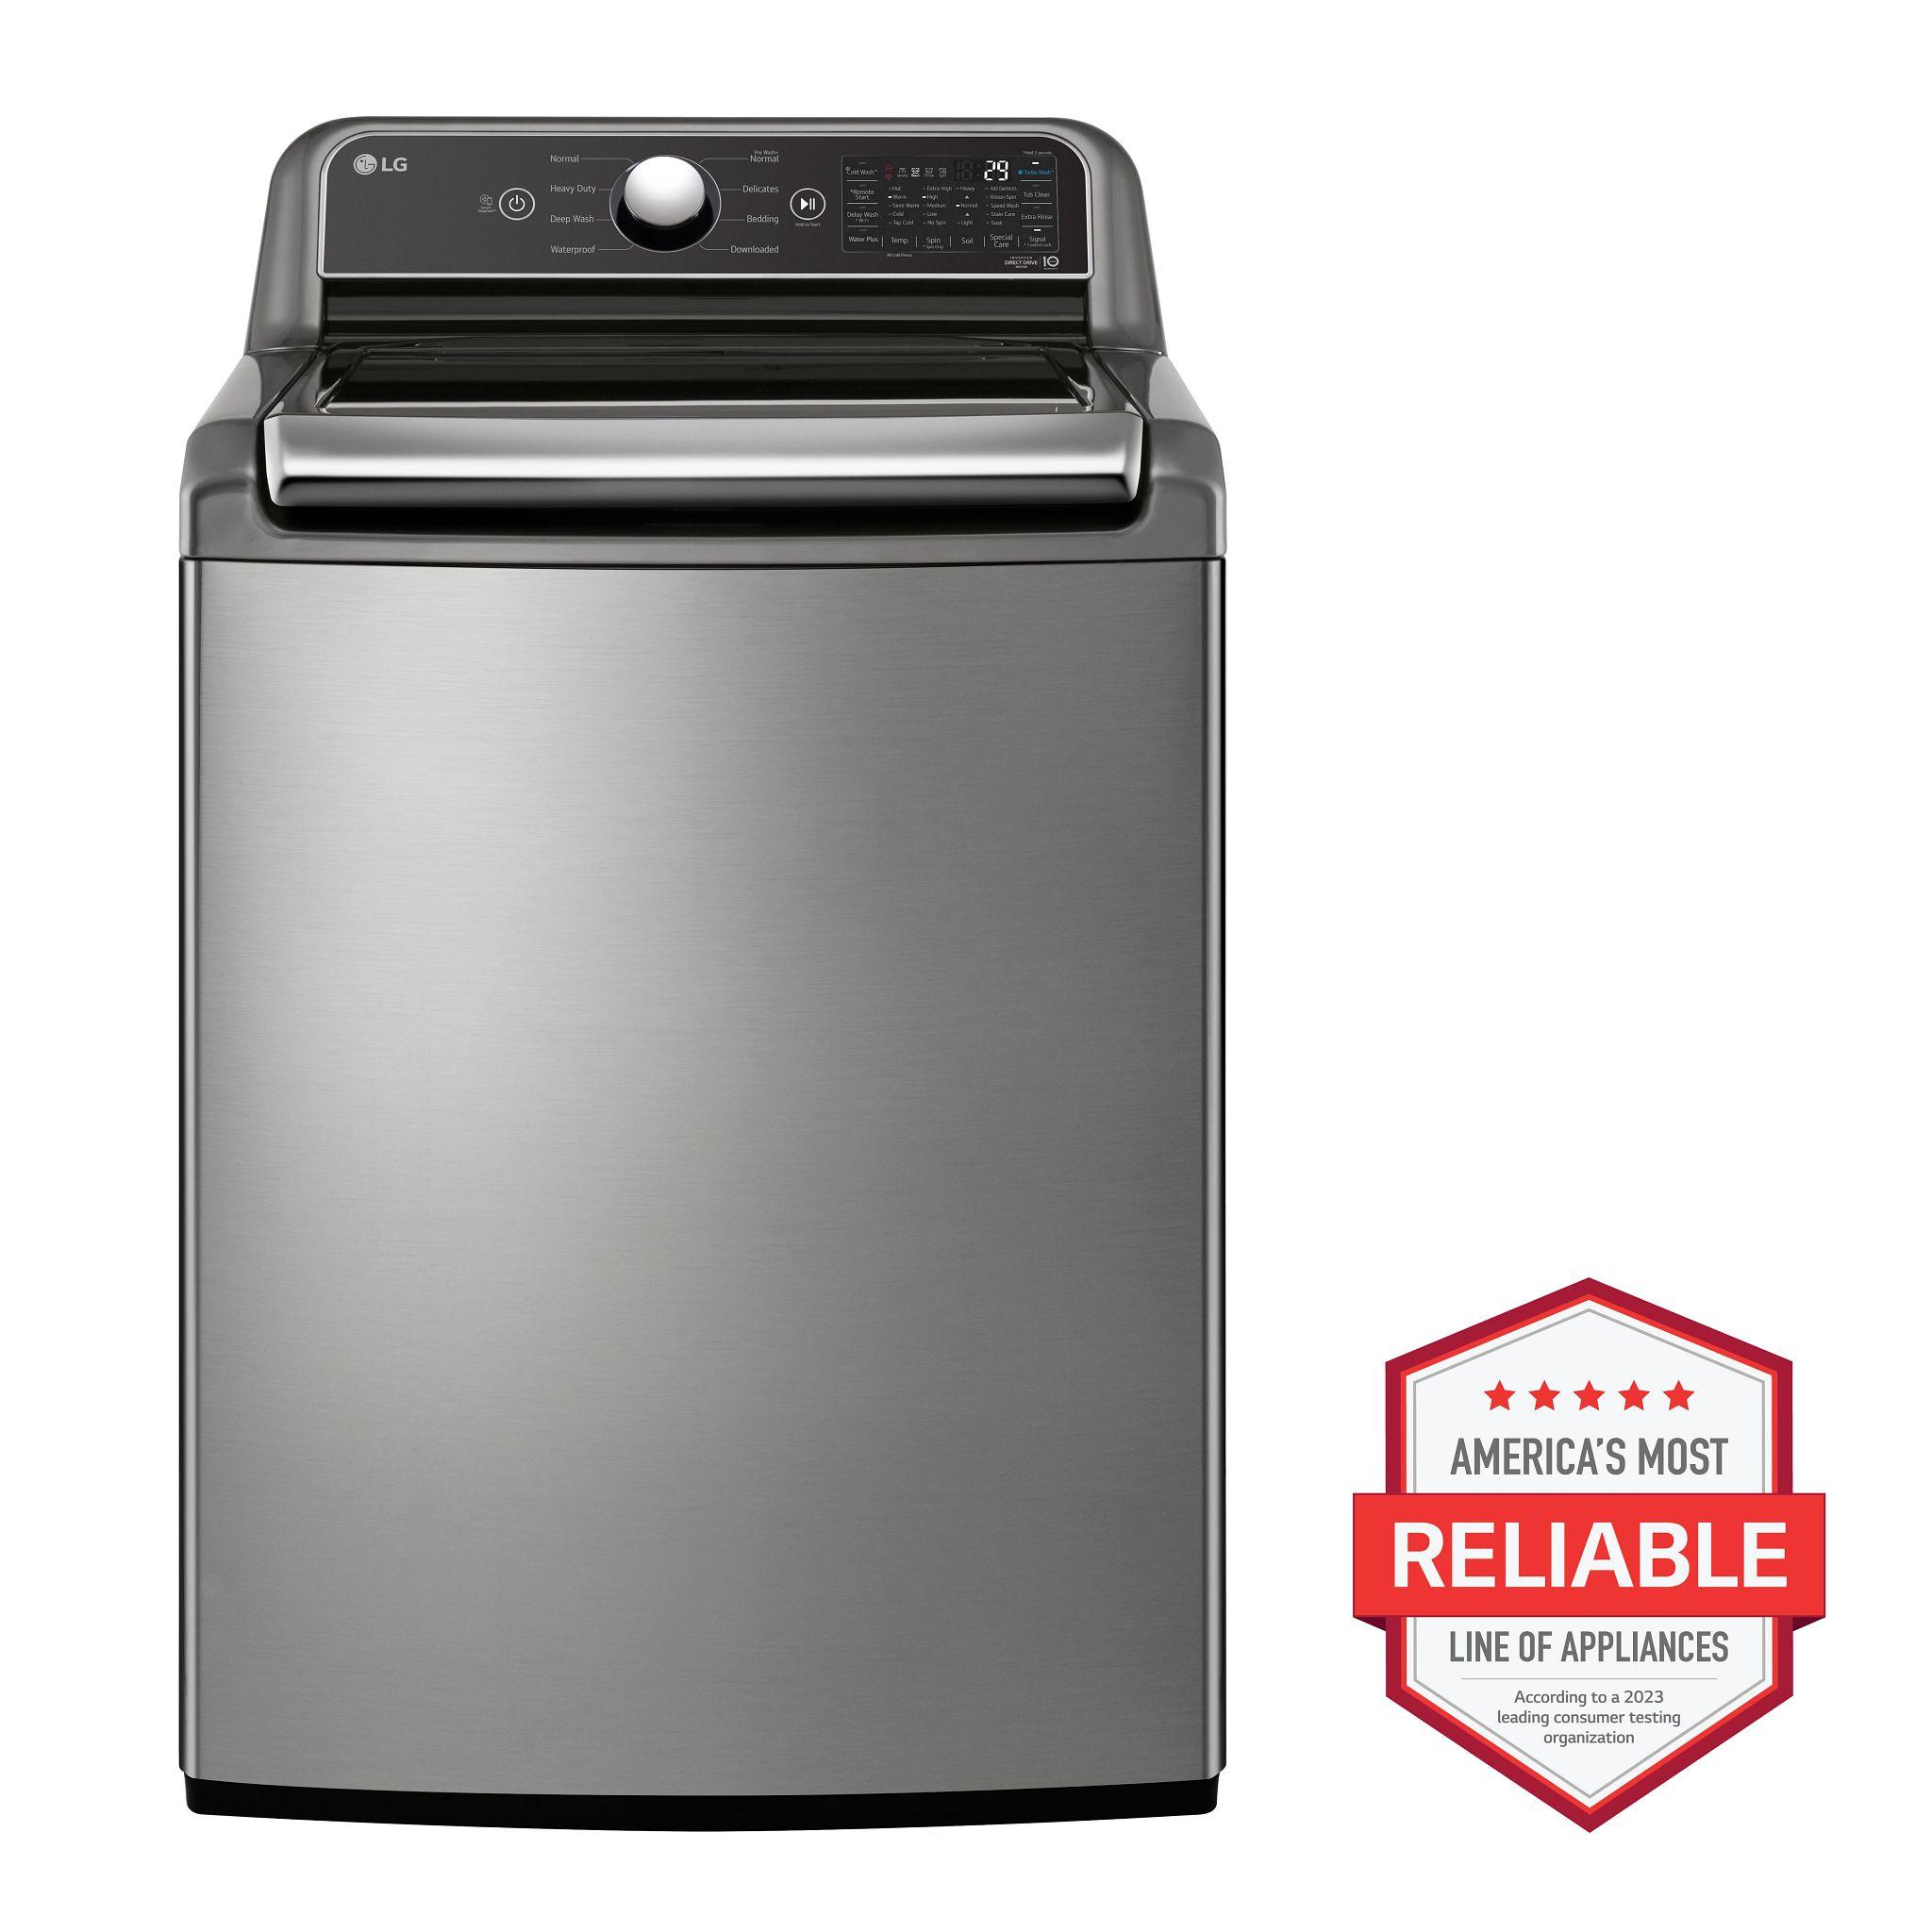 LG Appliances 5.5 cu.ft. Mega Capacity Smart wi-fi Enabled Top Load Washer with TurboWash3D™ Technology